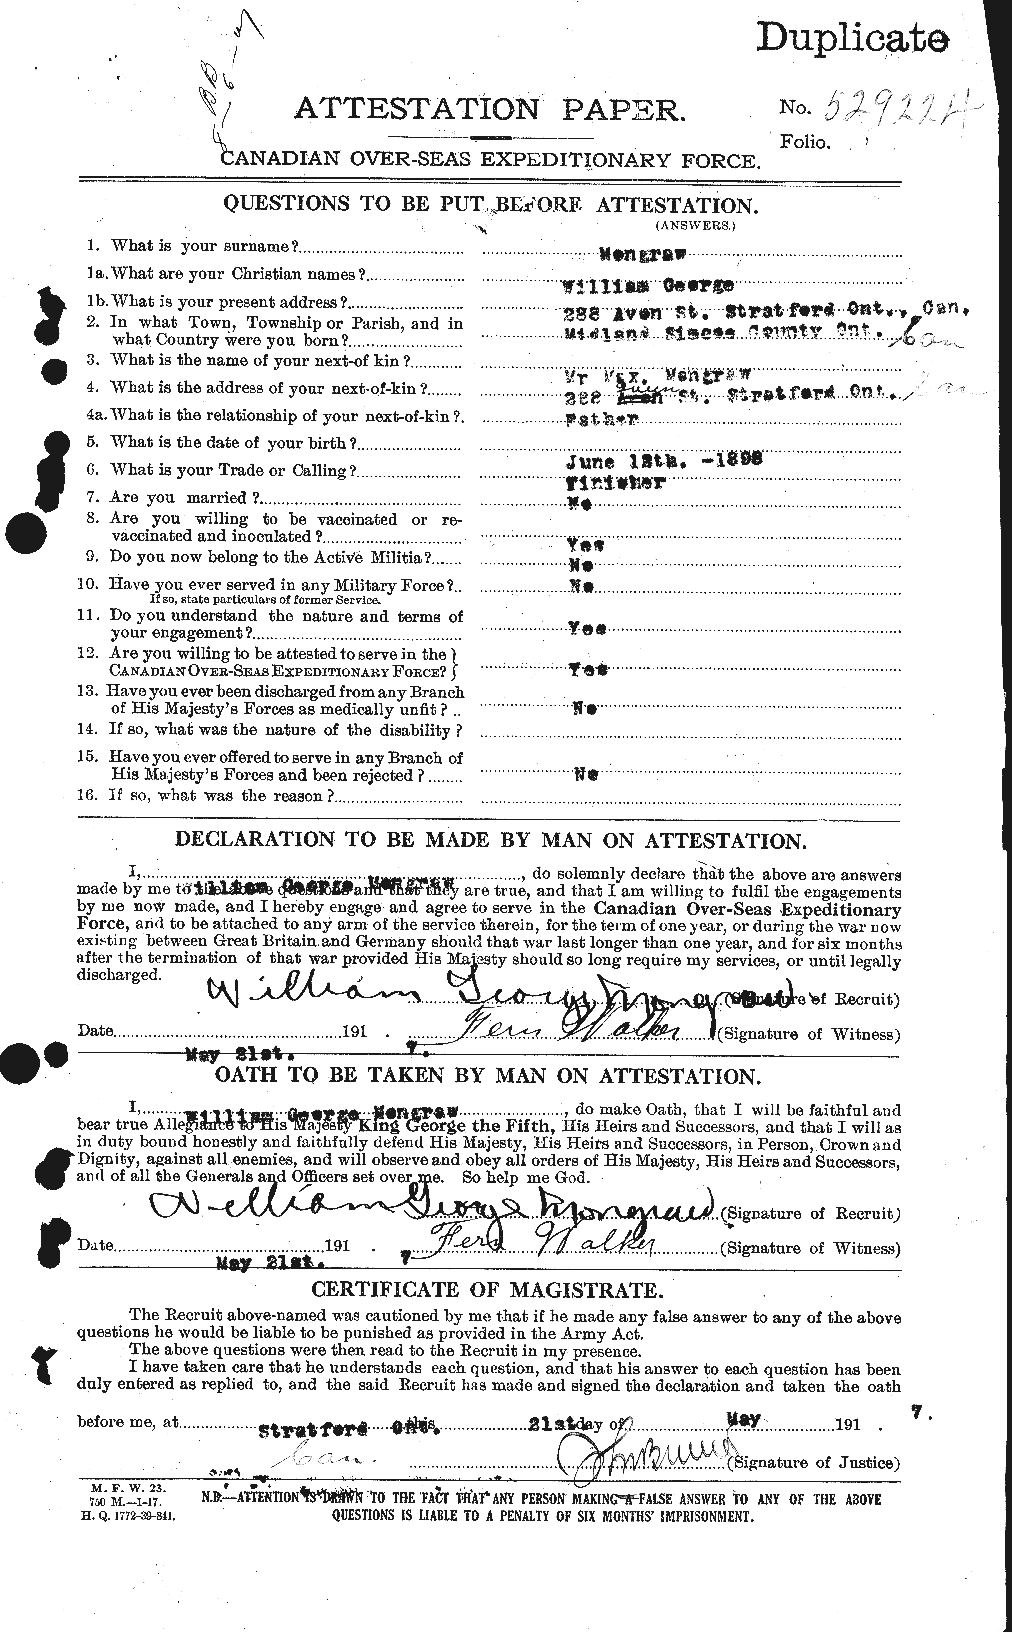 Personnel Records of the First World War - CEF 497256a